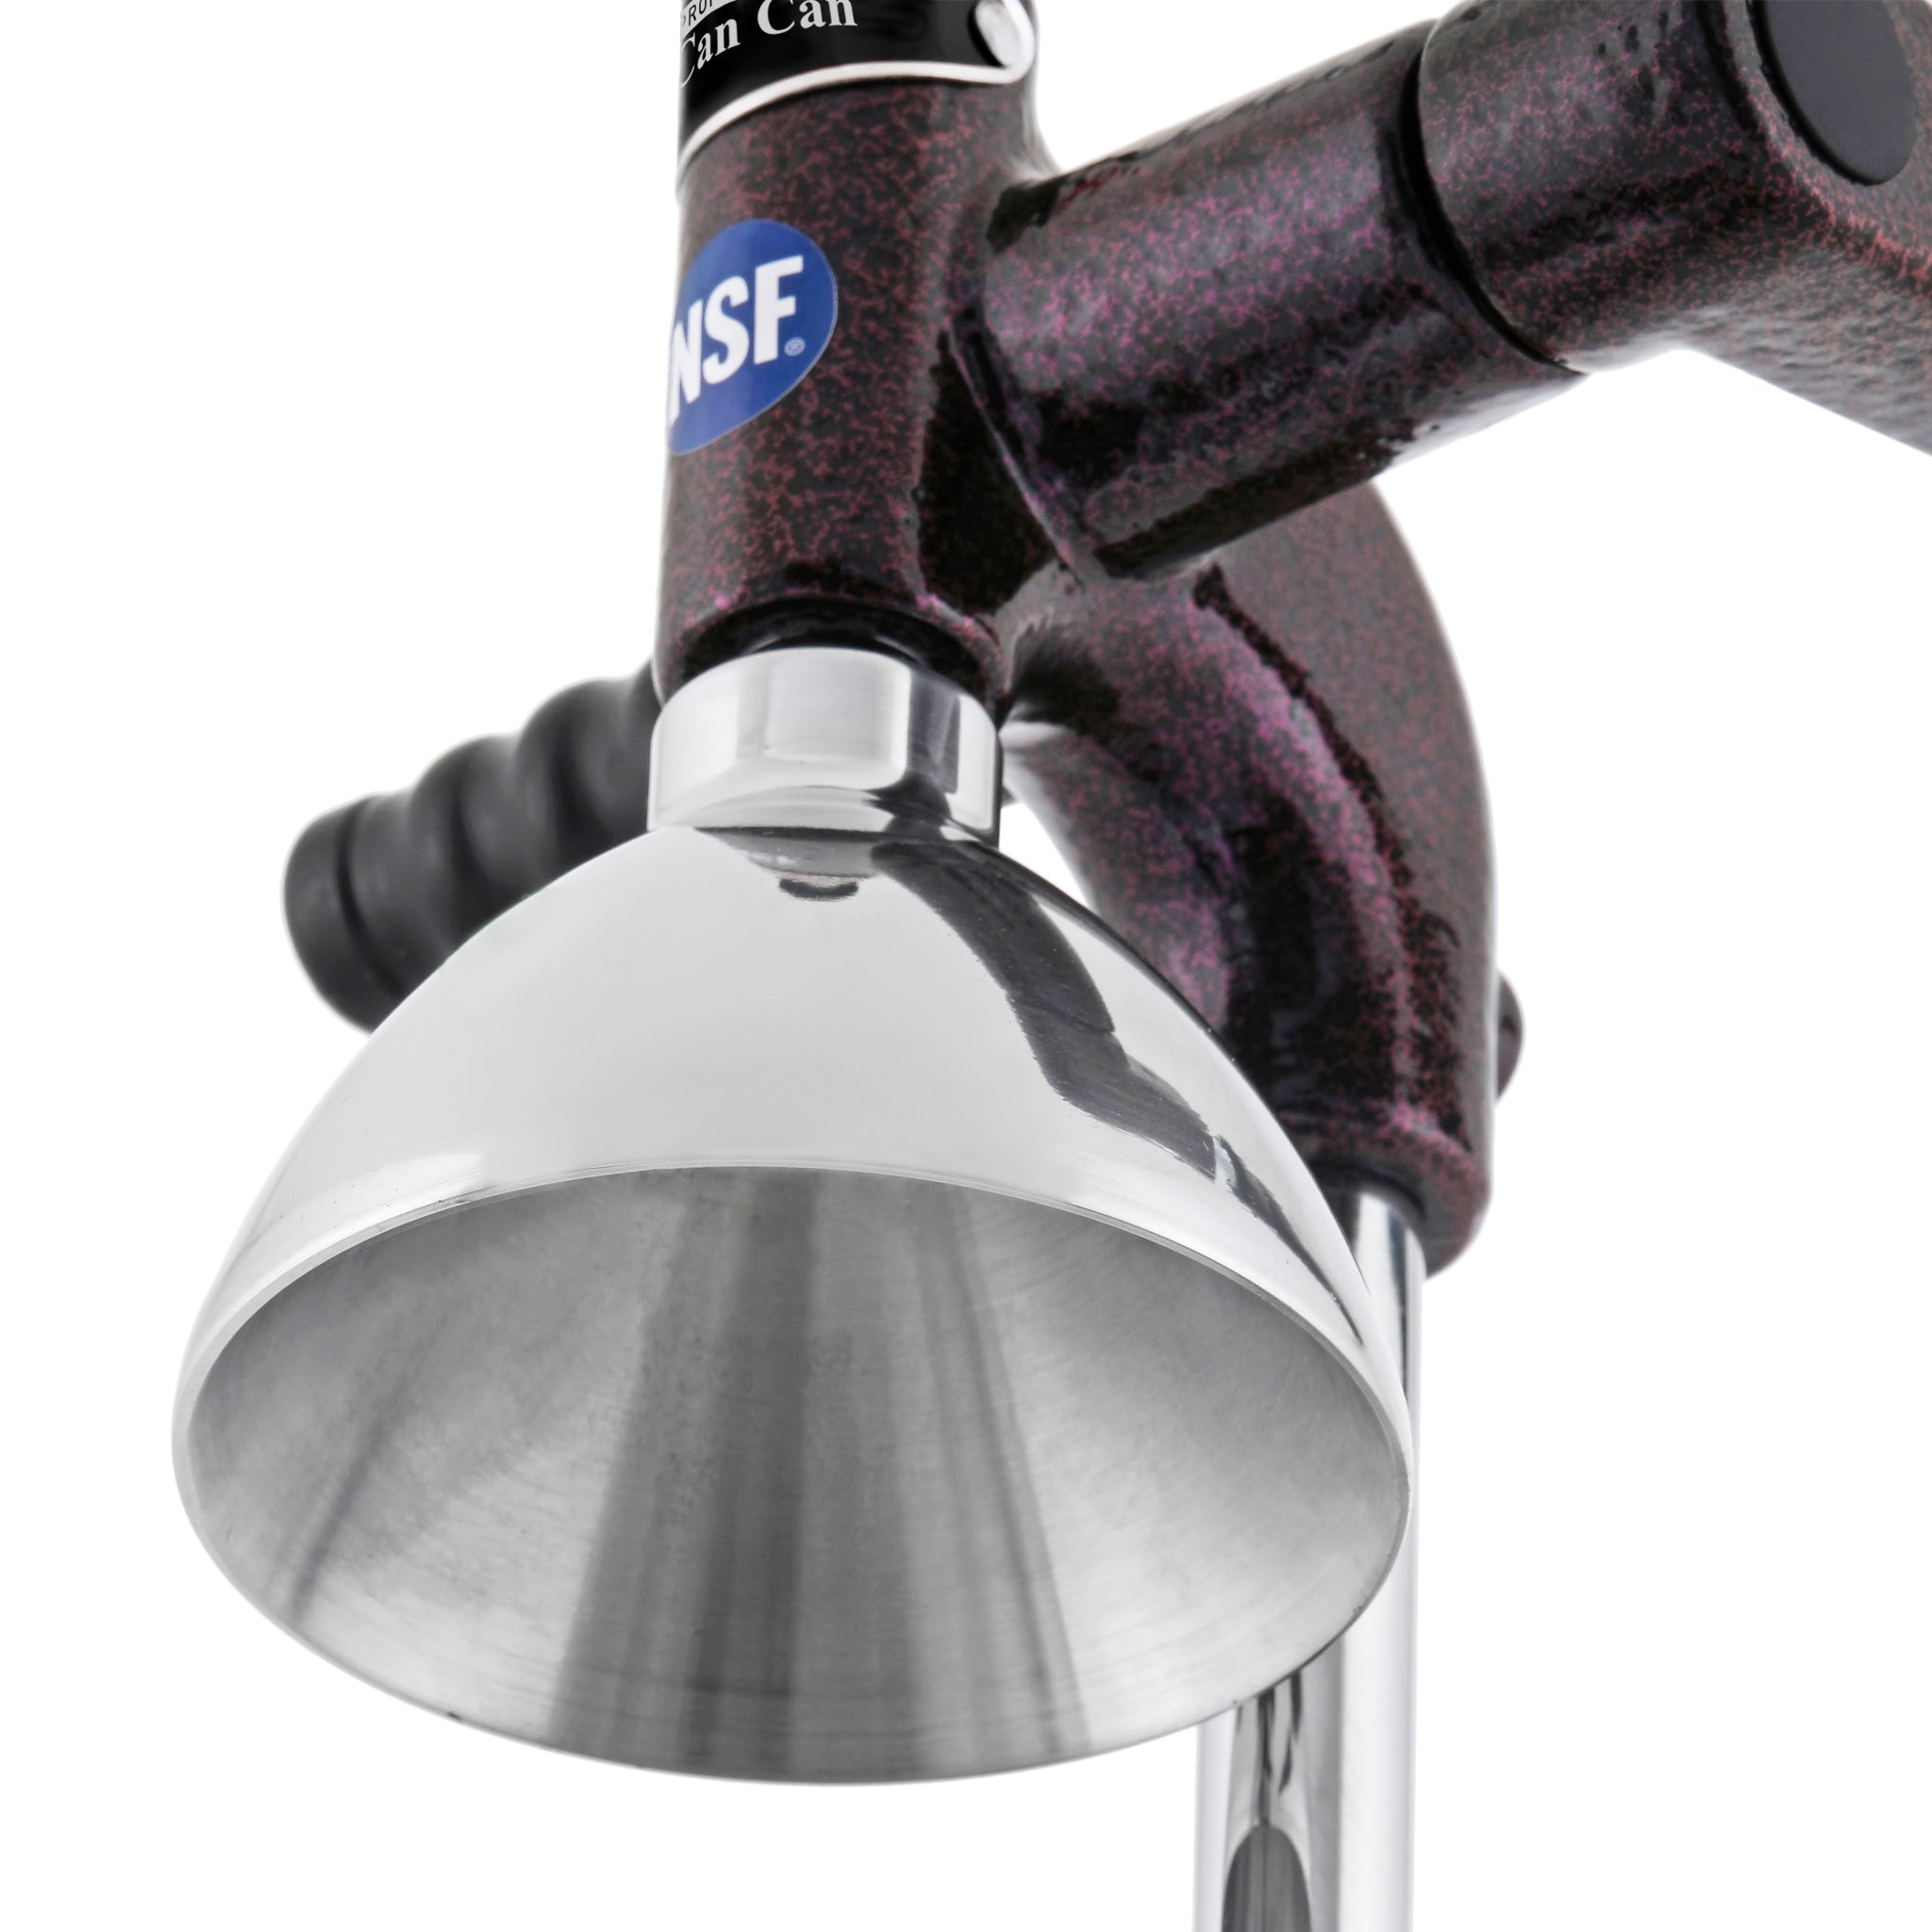 Tribest XL Manual Juice Press for Pomegranate and Citrus – Purple